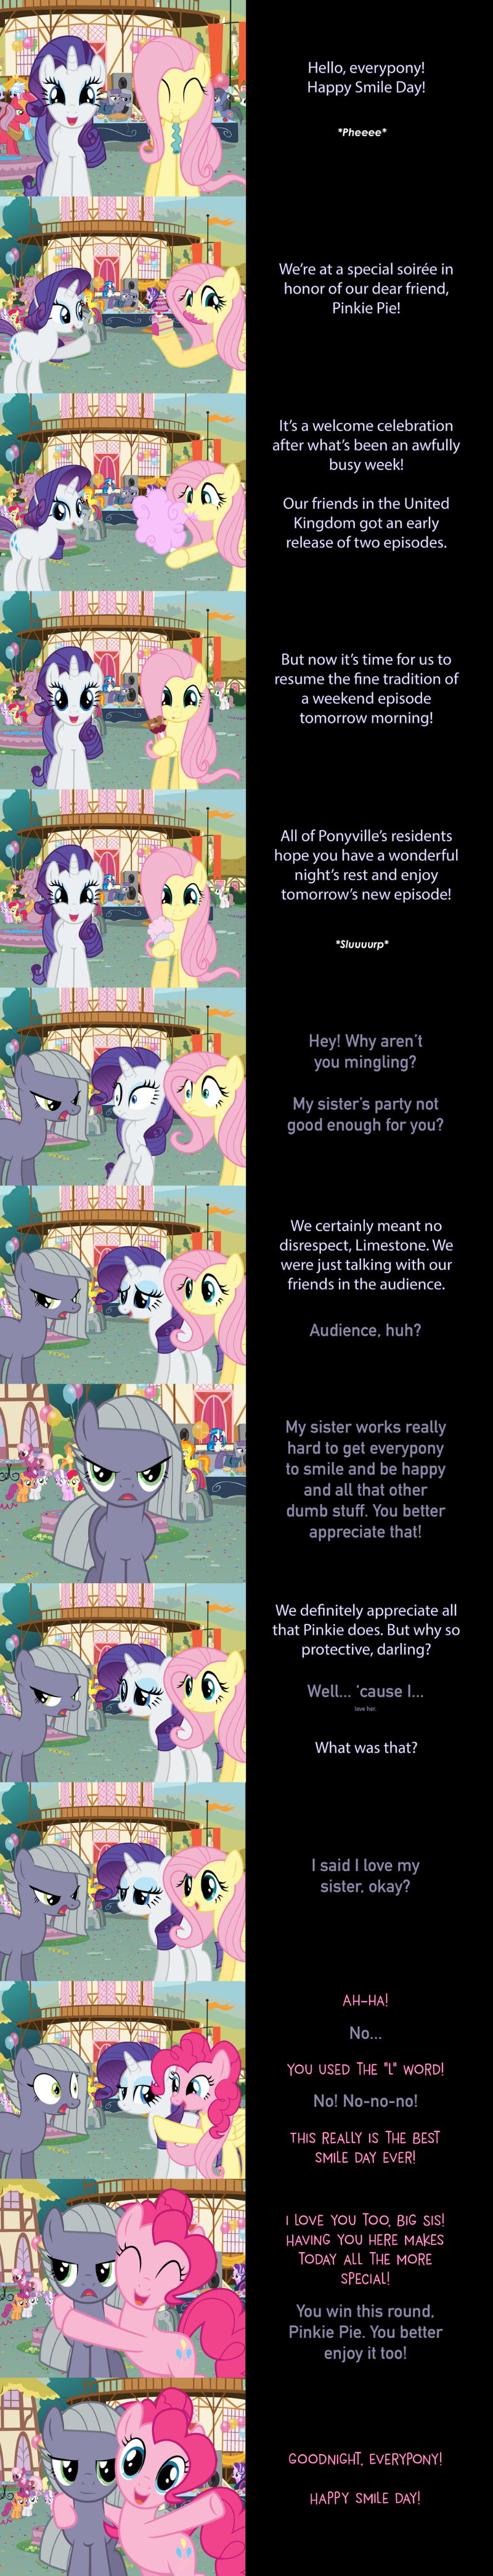 Comic #14 : Rarity and Fluttershy Say Goodnight